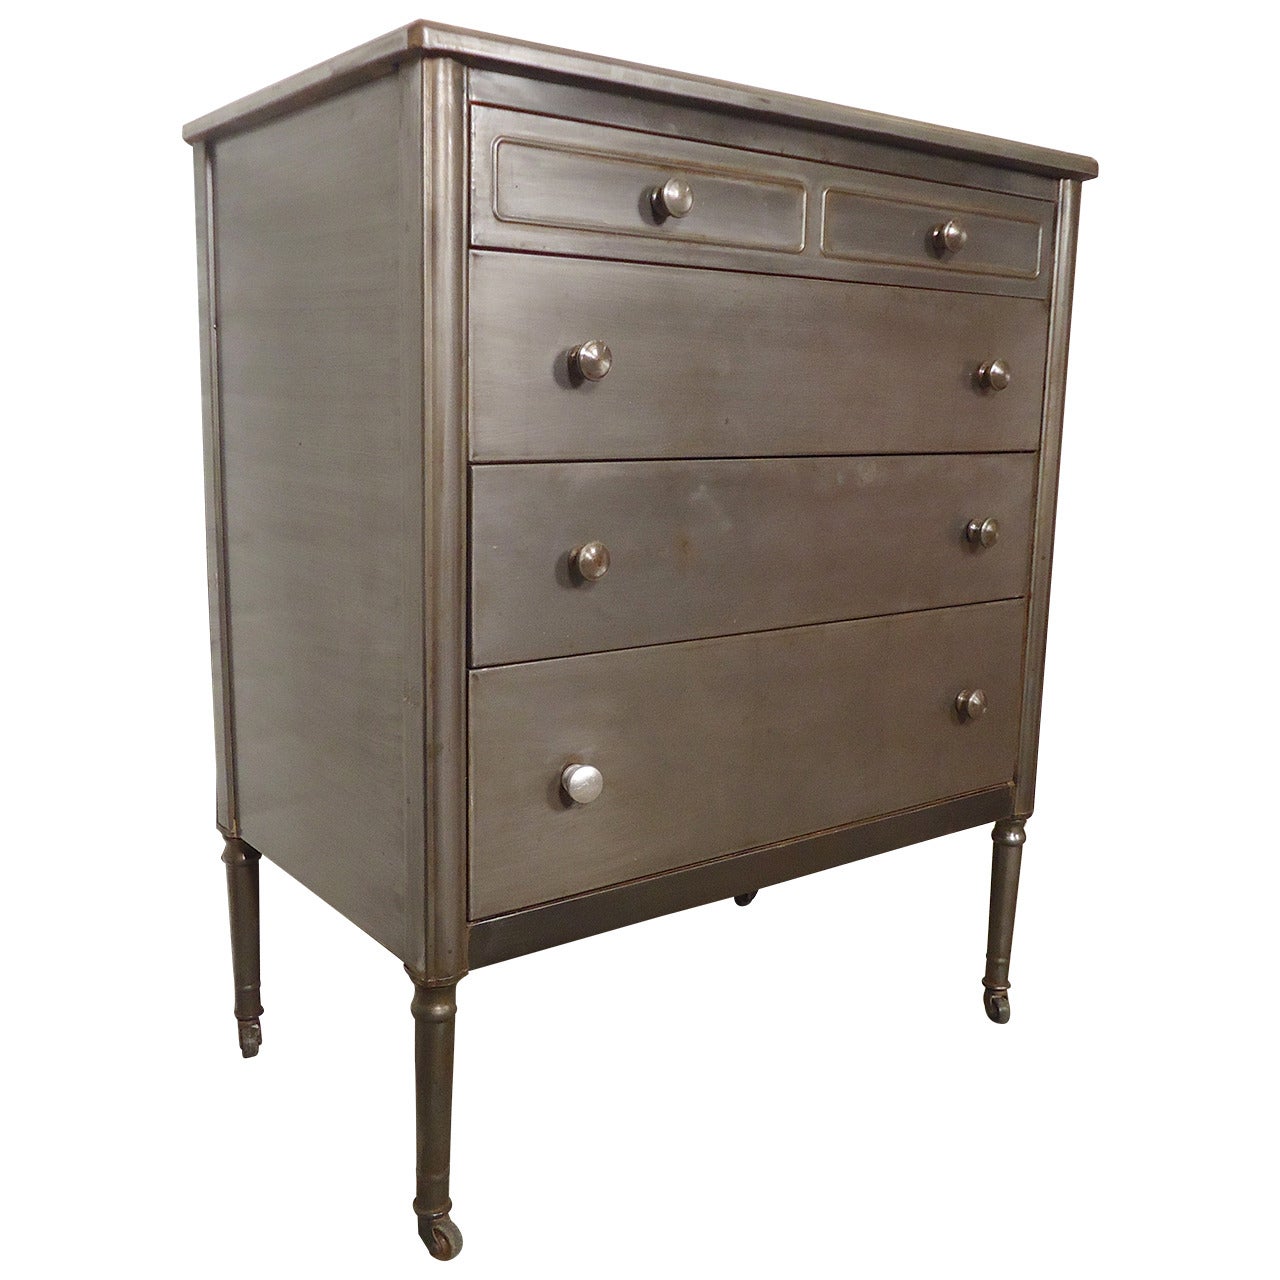 Four Drawer Metal Dresser by Simmons